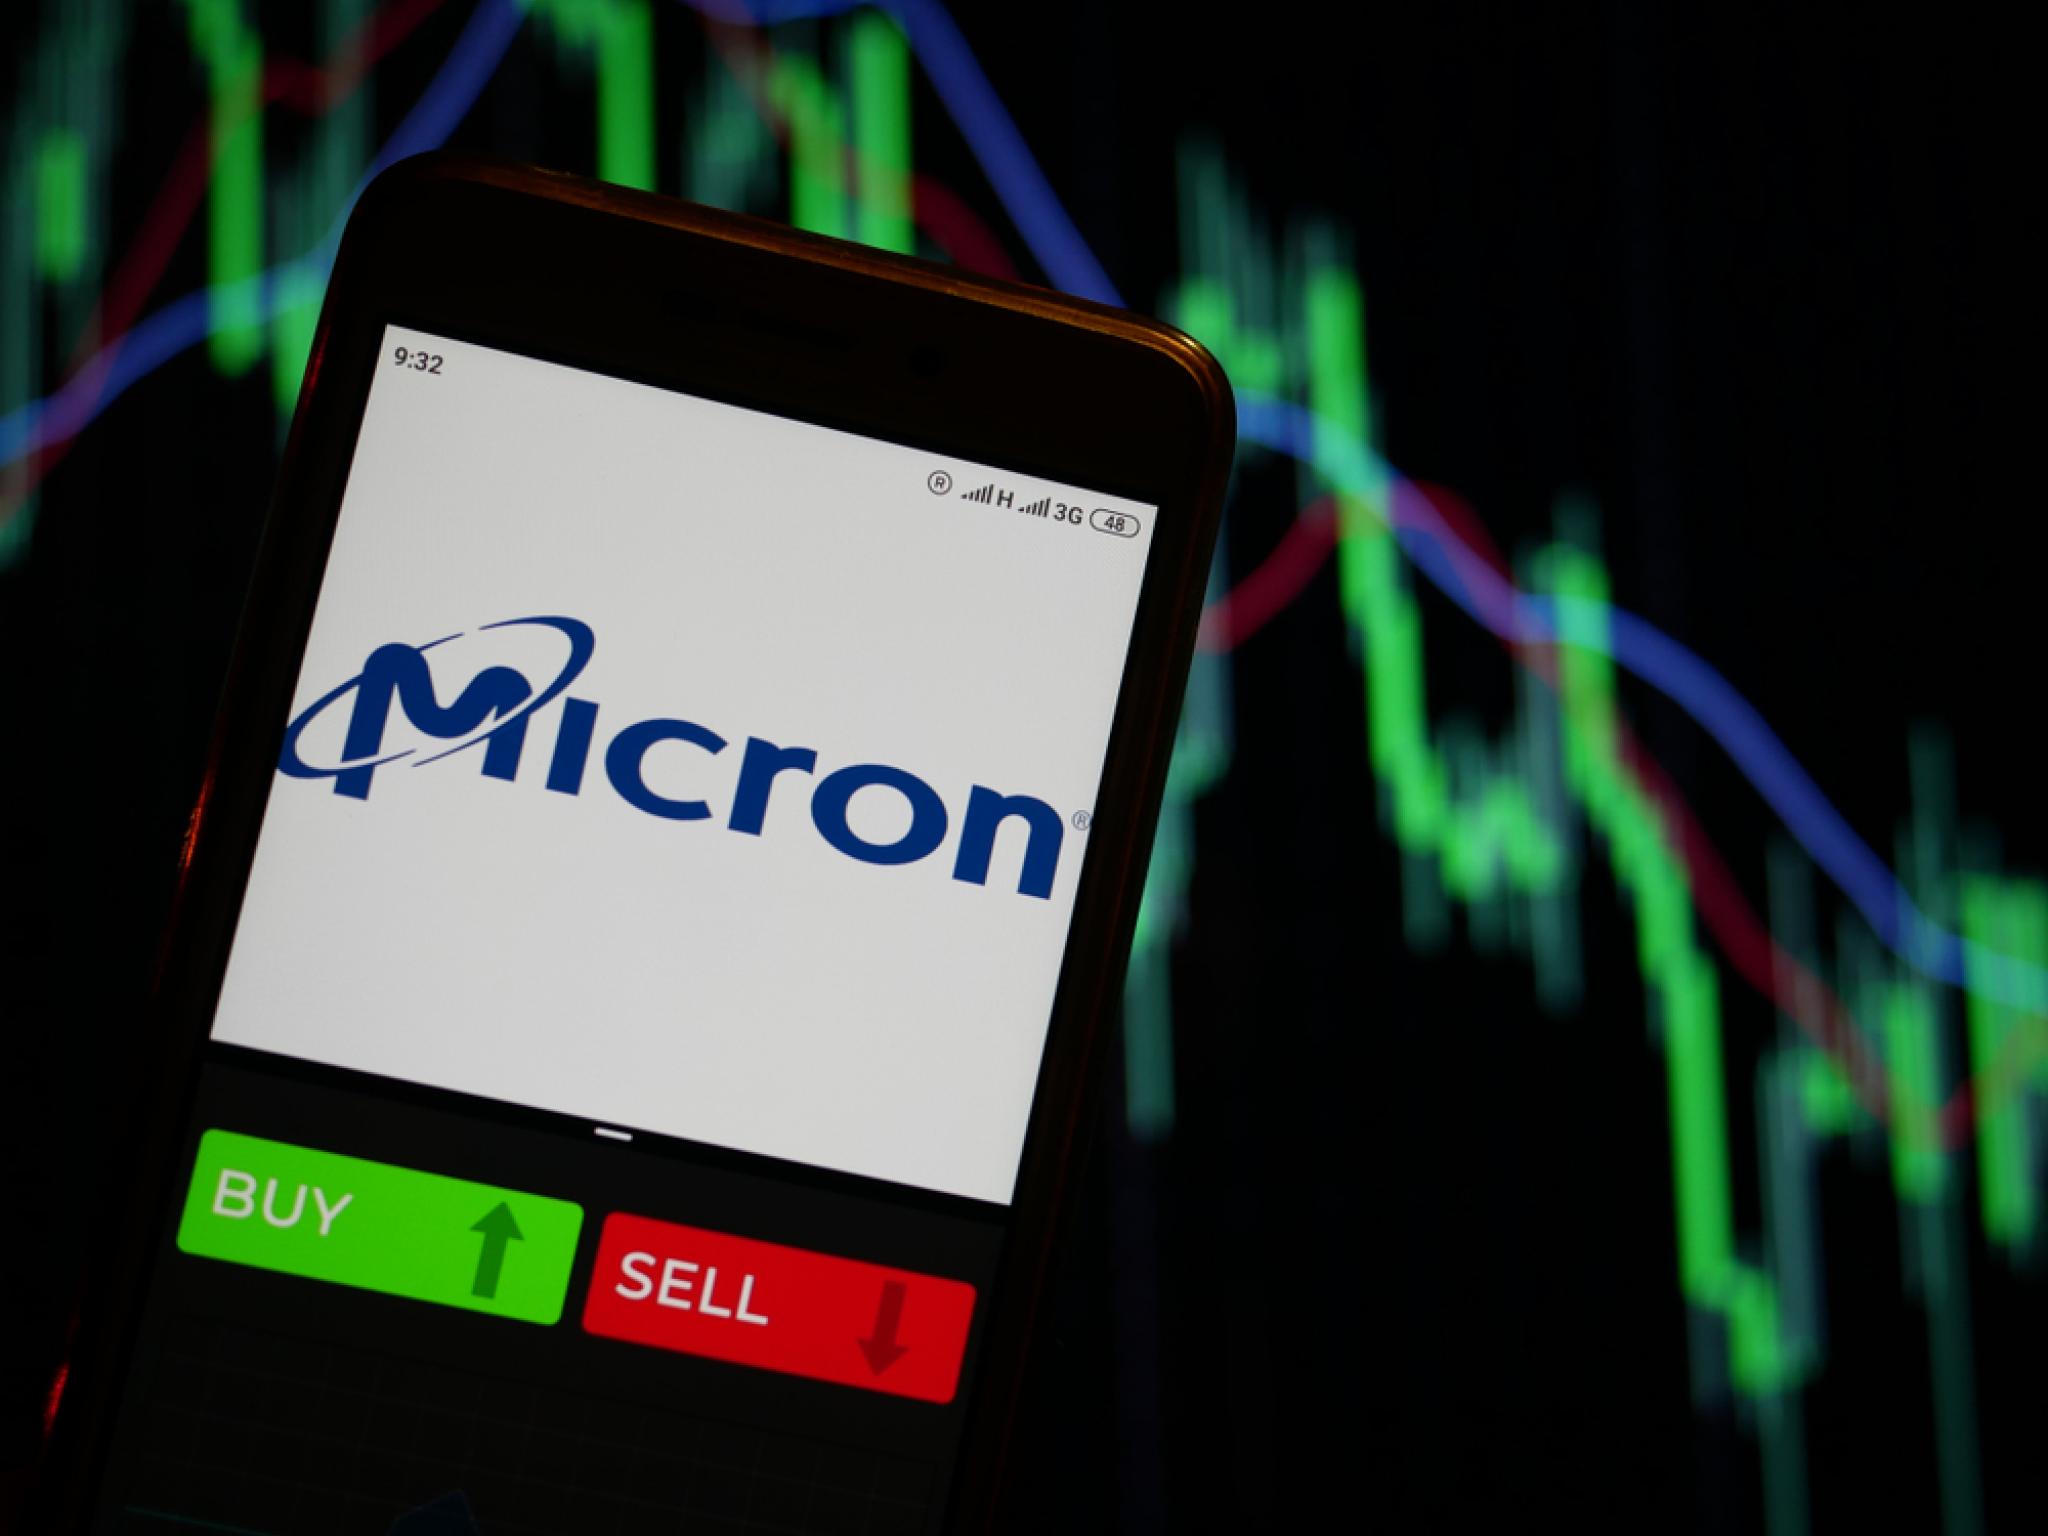  micron-to-rally-around-31-here-are-10-top-analyst-forecasts-for-monday 